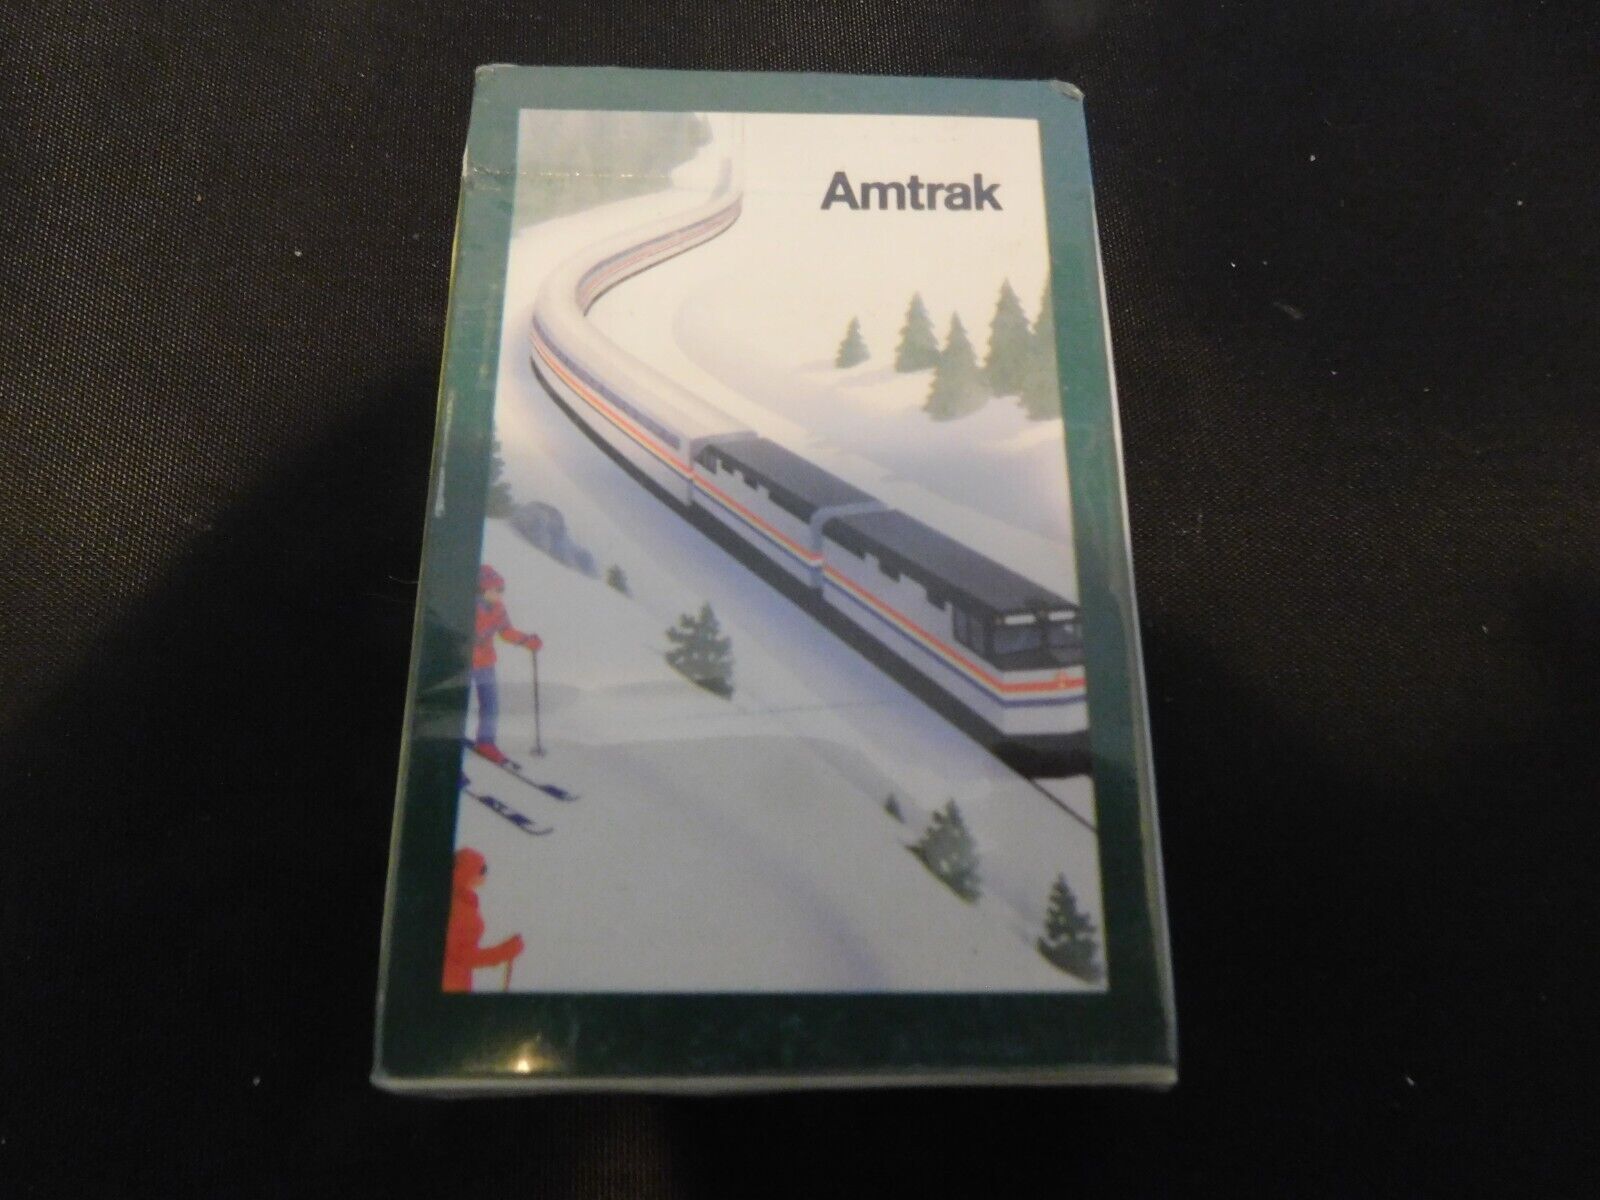 Great Deck of Vintage Souvenir AMTRAK Playing Cards - Plastic Coated Cards